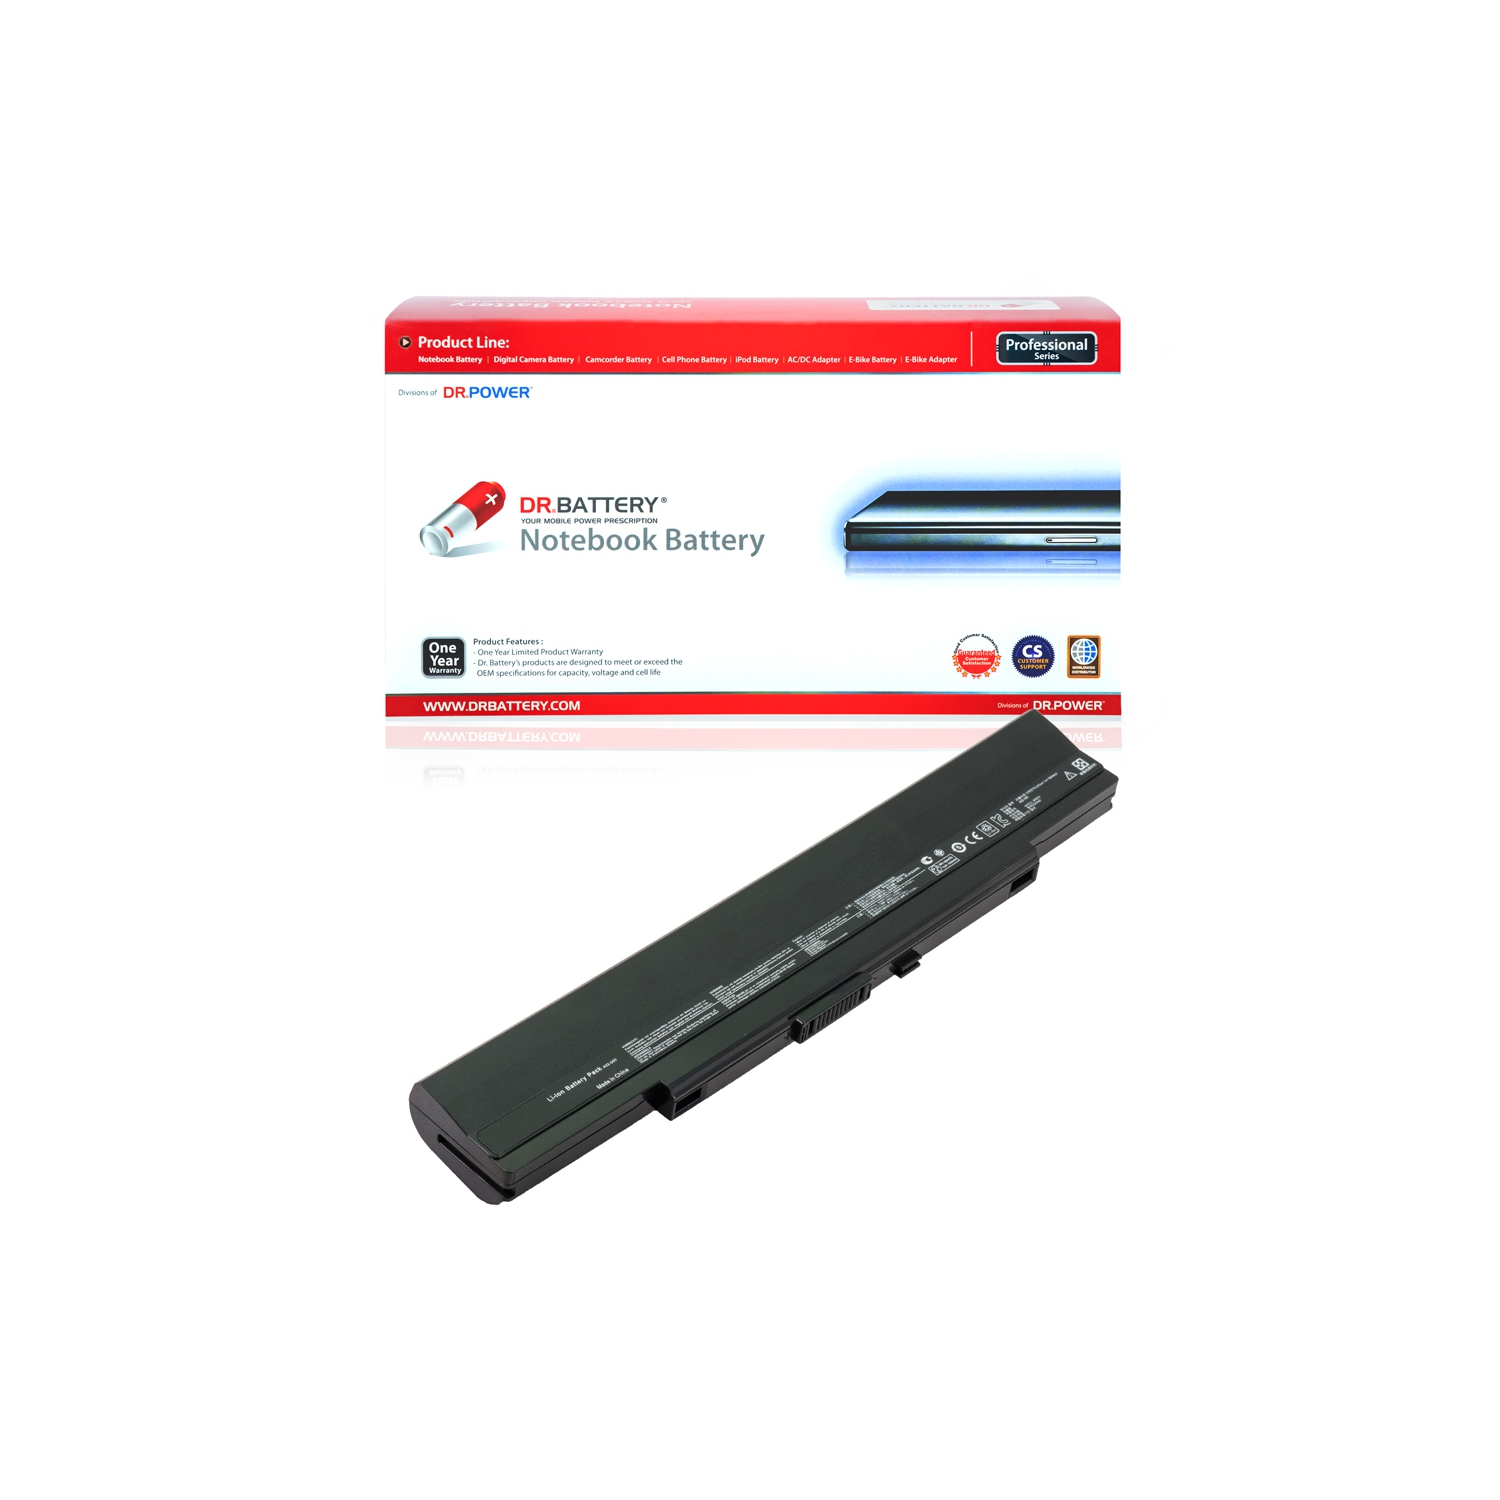 DR. BATTERY - Replacement for Asus U42JC / U42S / U42SD / U43 / U43F / U43J / U43Jc / A31-U53 / A32-U53 / A41-U53 / A42-U53